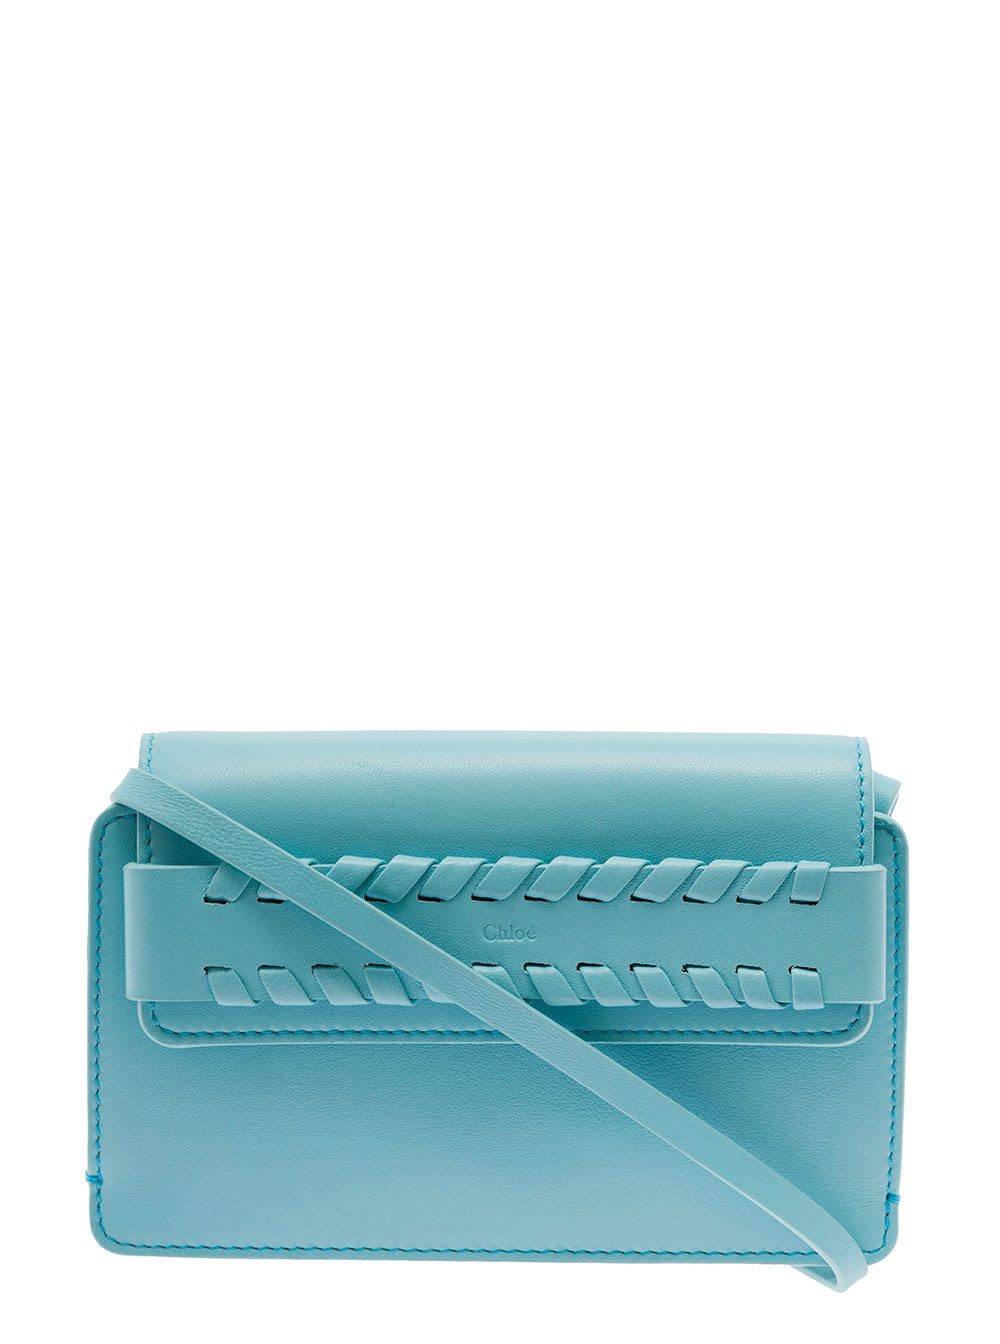 CHLOÉ MONY LIGHT BLUE SHOULDER BAG WITH WHIP-STITCHED BELT IN GRAINY LEATHER WOMAN